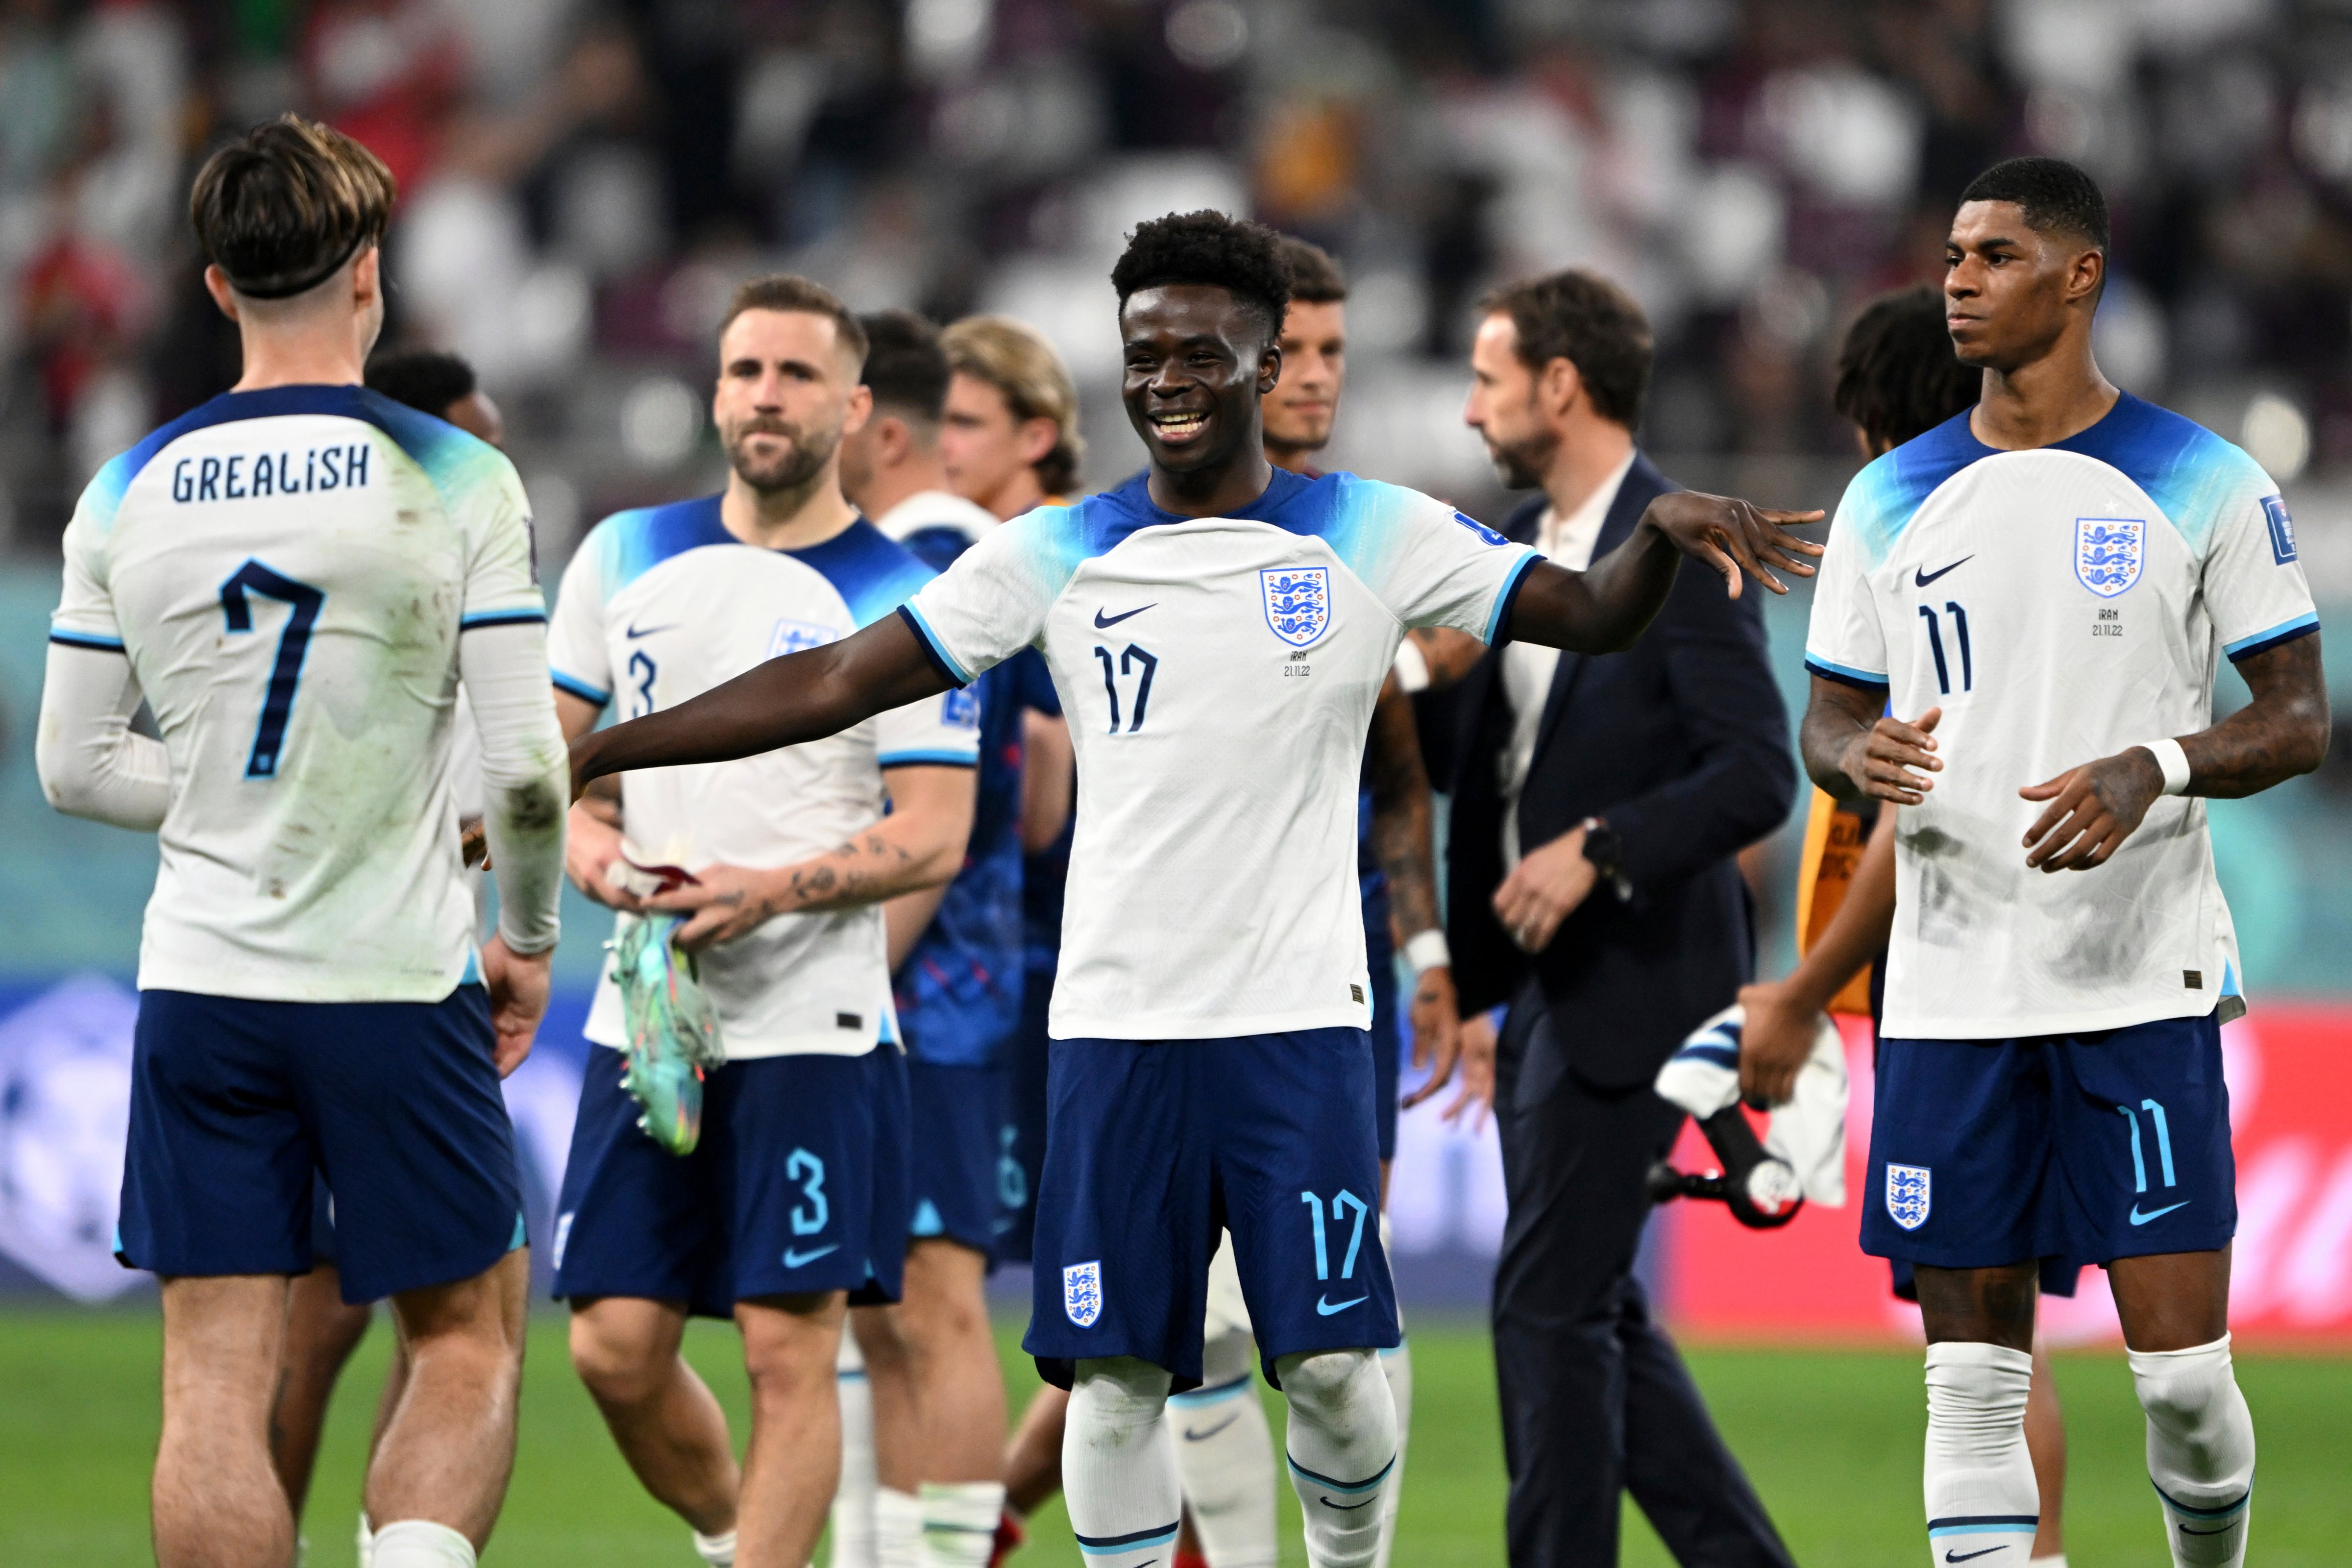 England's Bukayo Saka celebrates after the final whistle after scoring two of the Three Lions' six goals against Iran.  Coach Gareth Southgate walks in the background at Chalifa International Stadium in Qatar, November 21, 2022. (Robert Michael—picture-alliance/dpa/AP)